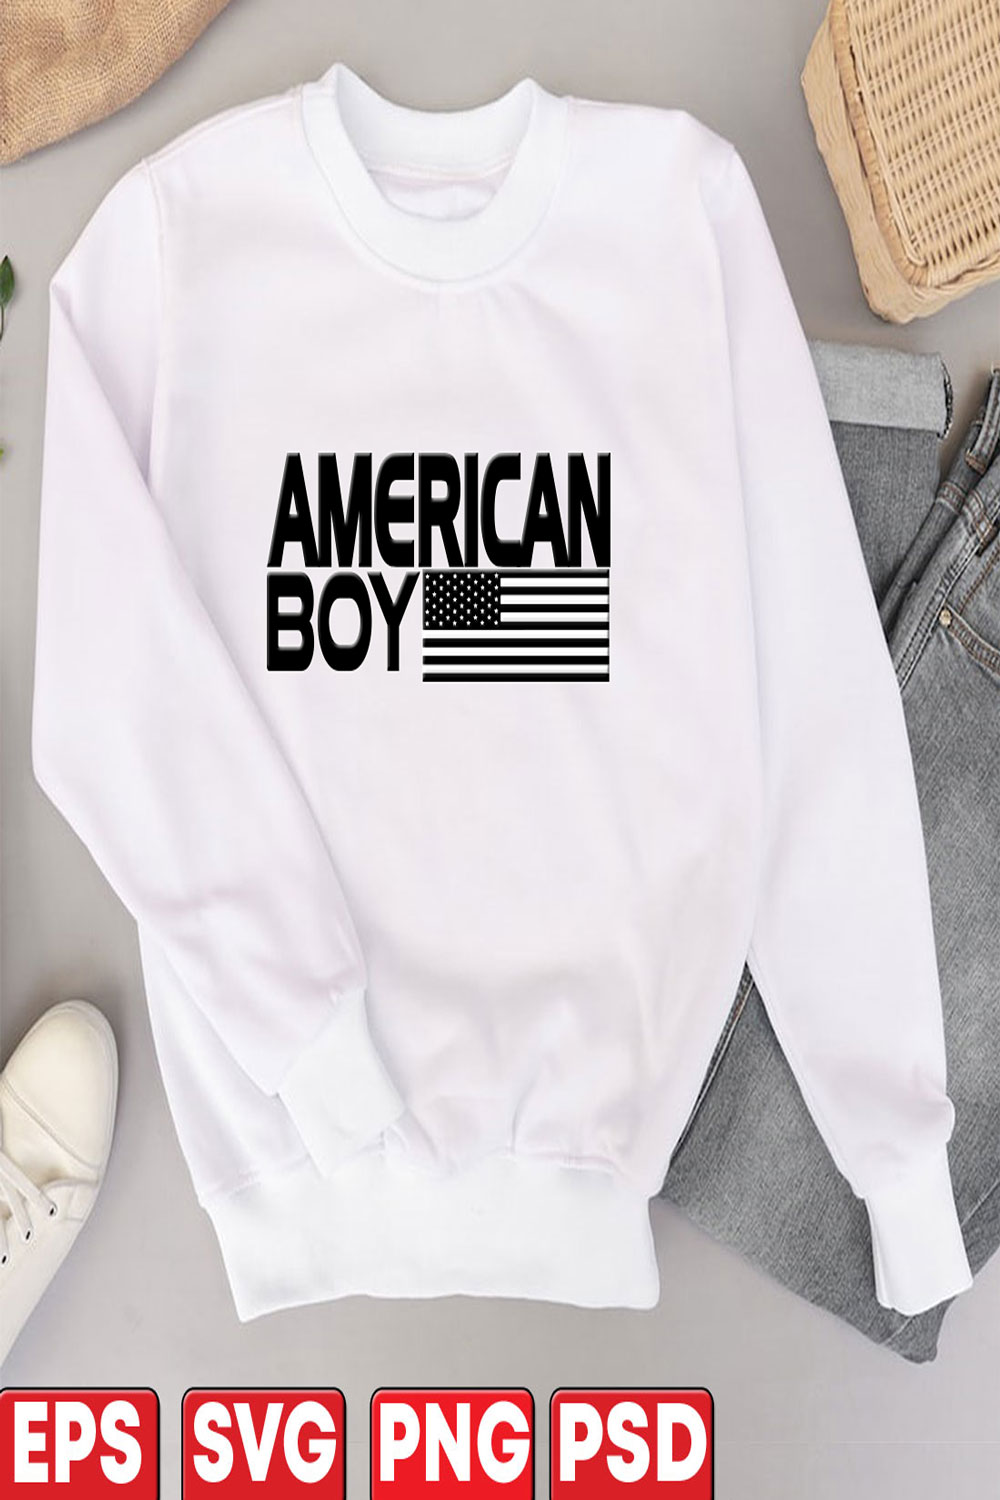 All American boy pinterest preview image.